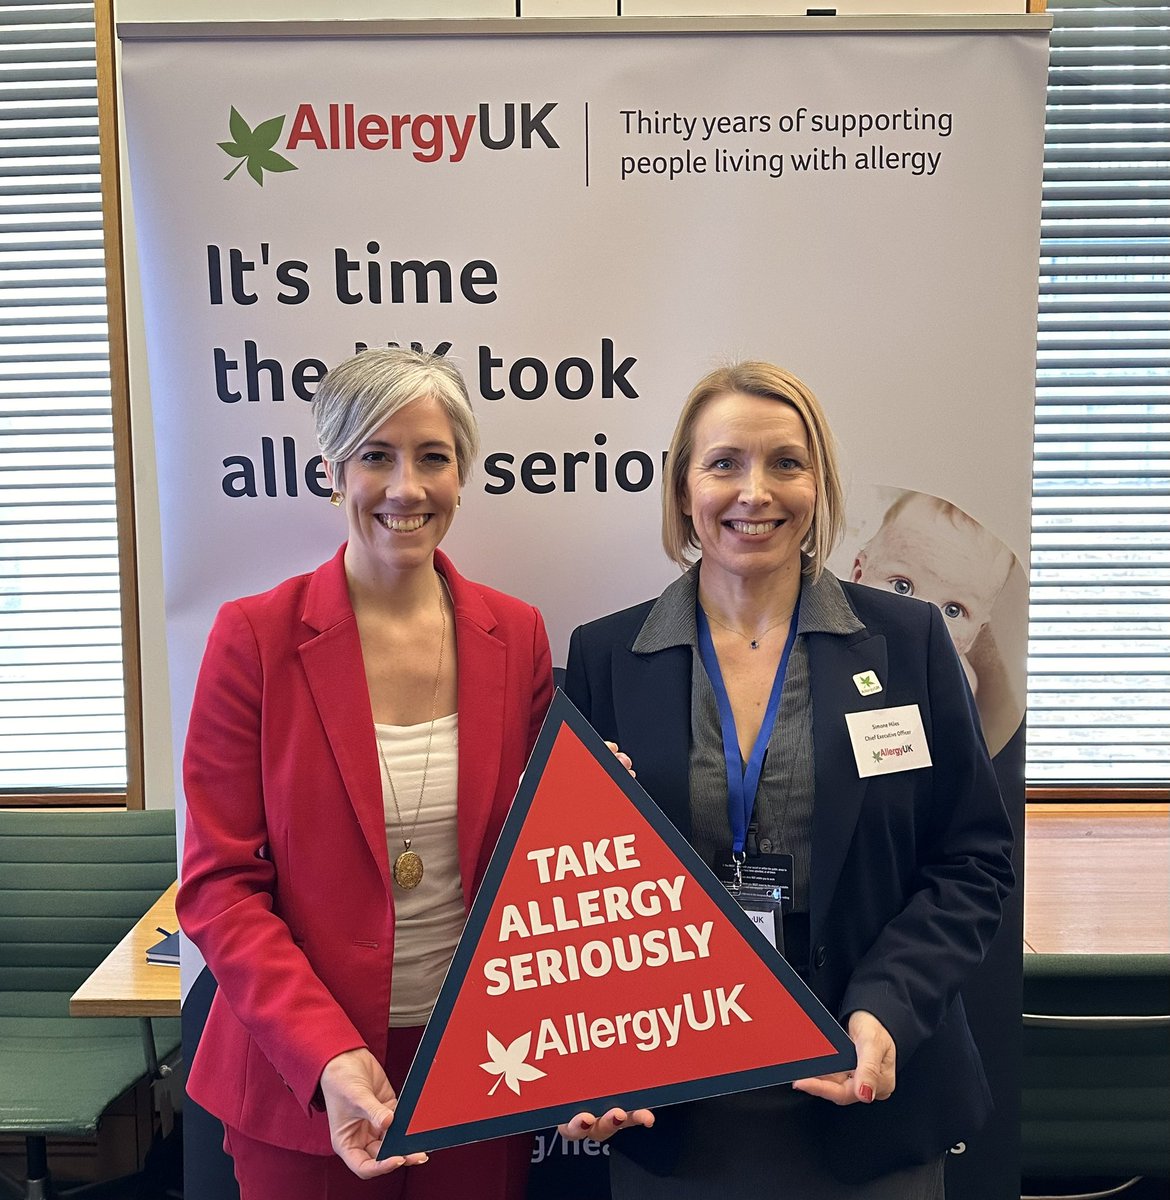 Allergy is the most common chronic disease in Europe, and those who suffer with allergies struggle daily with the fear of possible illness, or even death, from an allergic reaction. Today I joined @AllergyUK1 in parliament to say 
#ItsTimeToTakeAllergySeriously